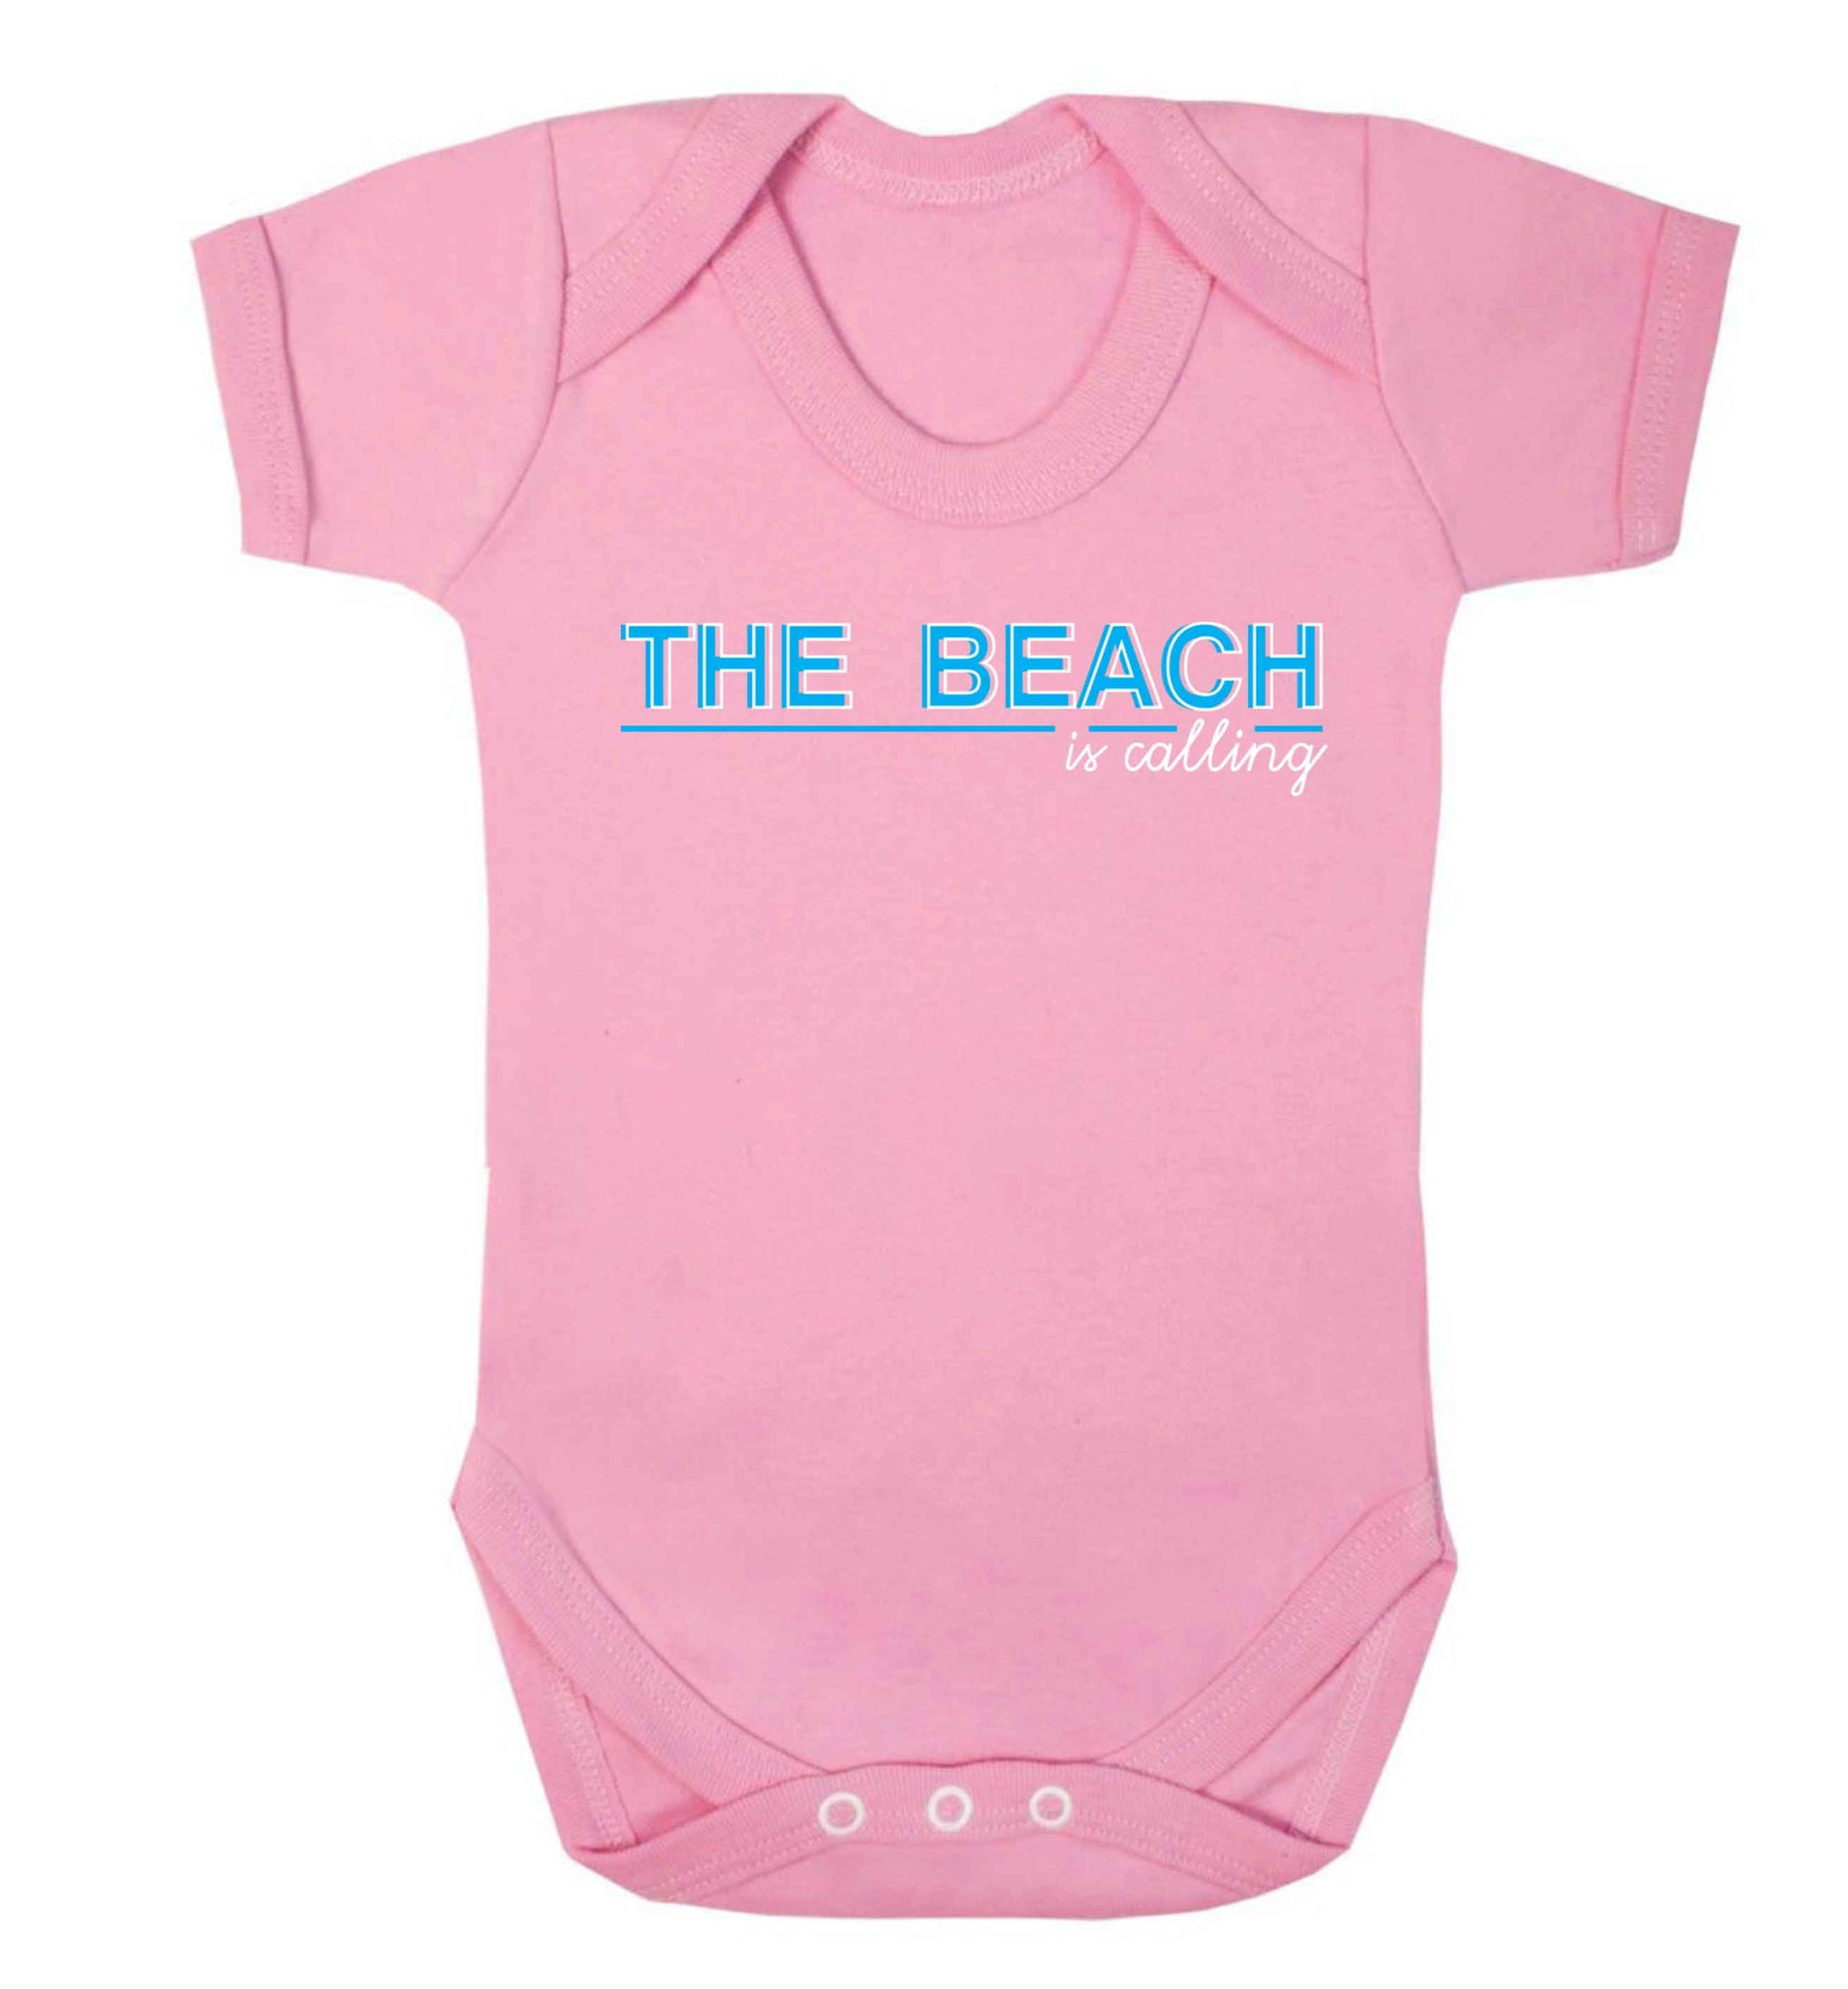 The beach is calling Baby Vest pale pink 18-24 months